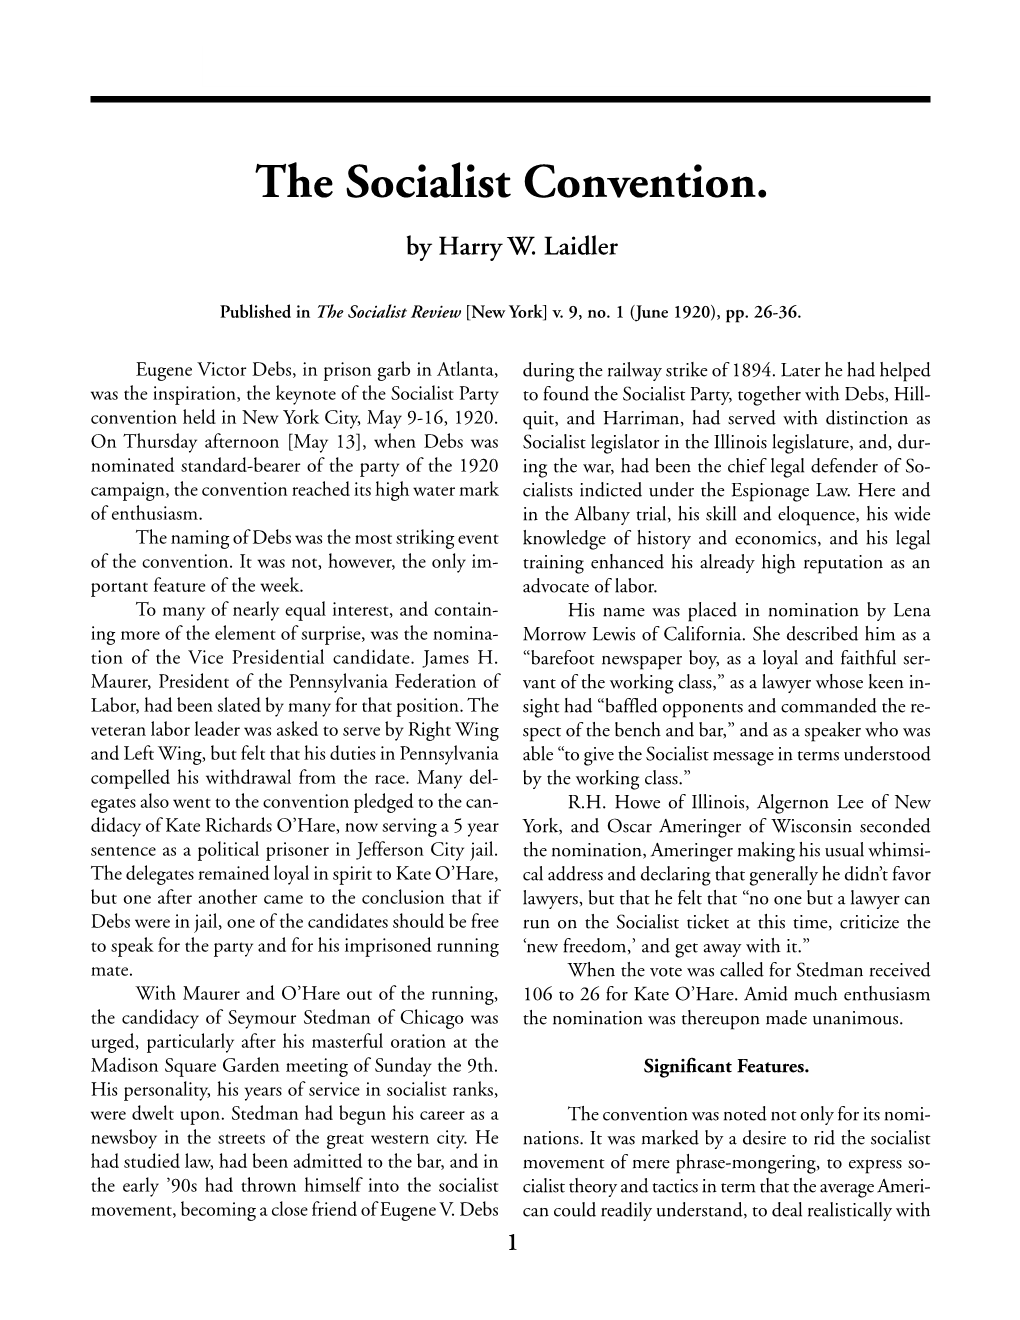 The Socialist Convention. by Harry W